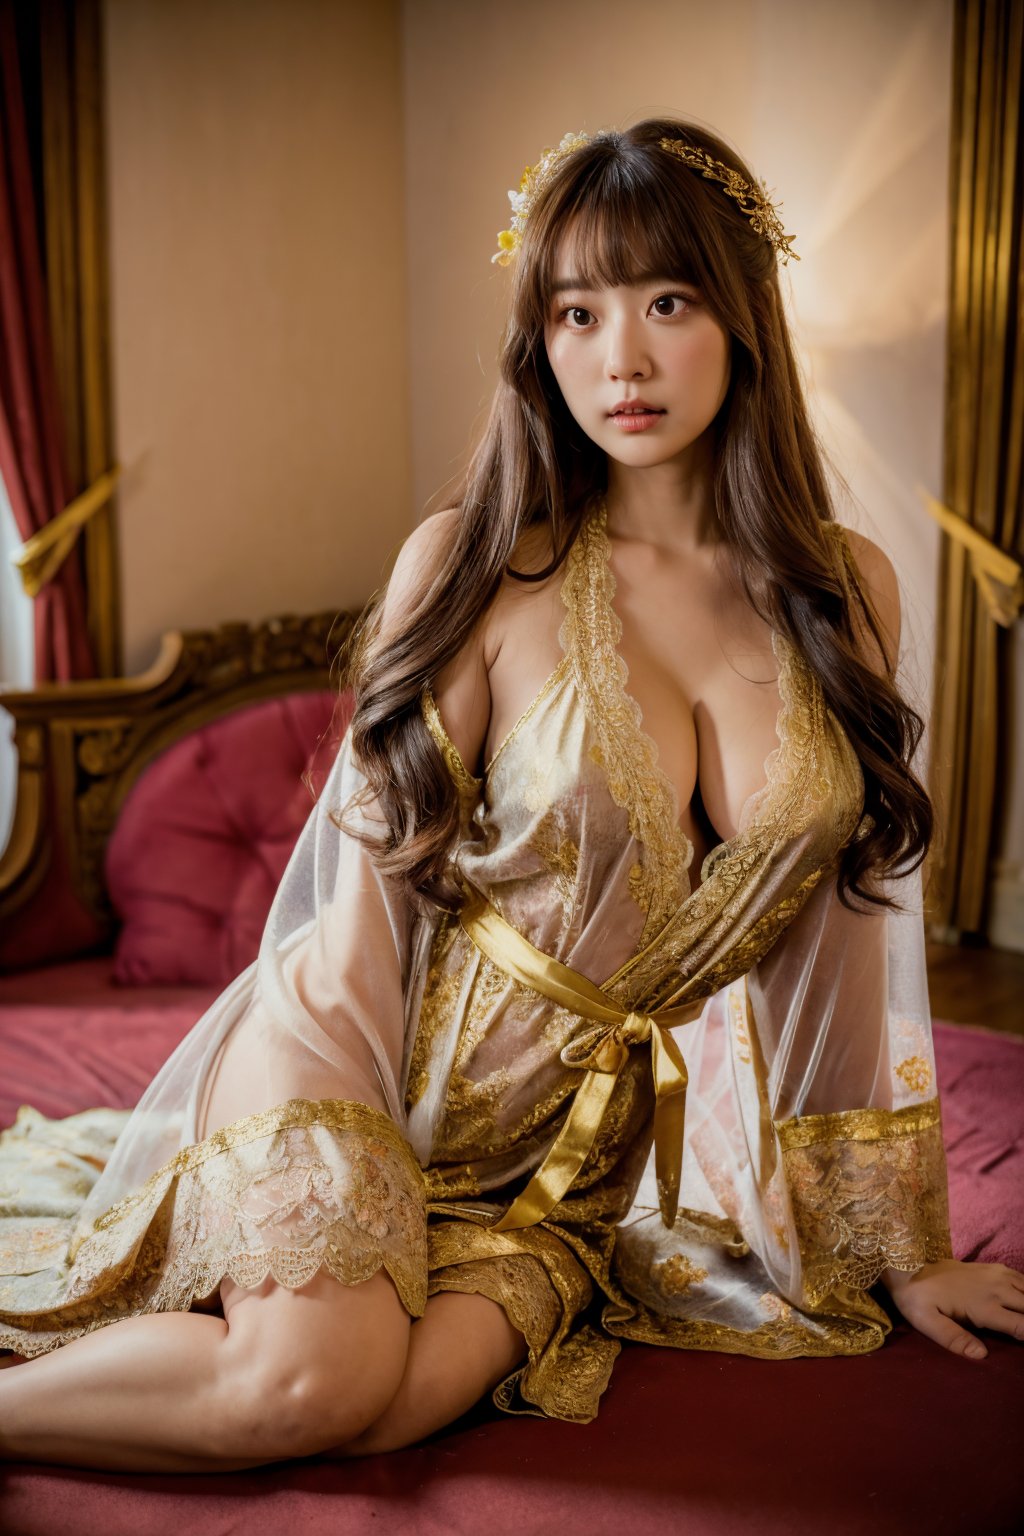 best quality, masterpiece, raw photo of a 1girl in long floral lace see-through robe which often for ornate details and gold jewellery, flowing long brown hair cascading over her shoulders, show cleavage, middle distance shot taken by long range lens, low key light, soft shadow, soft bokeh, professional photography, balanced contract, balanced exposure, playful in the room, daylight, playful theme